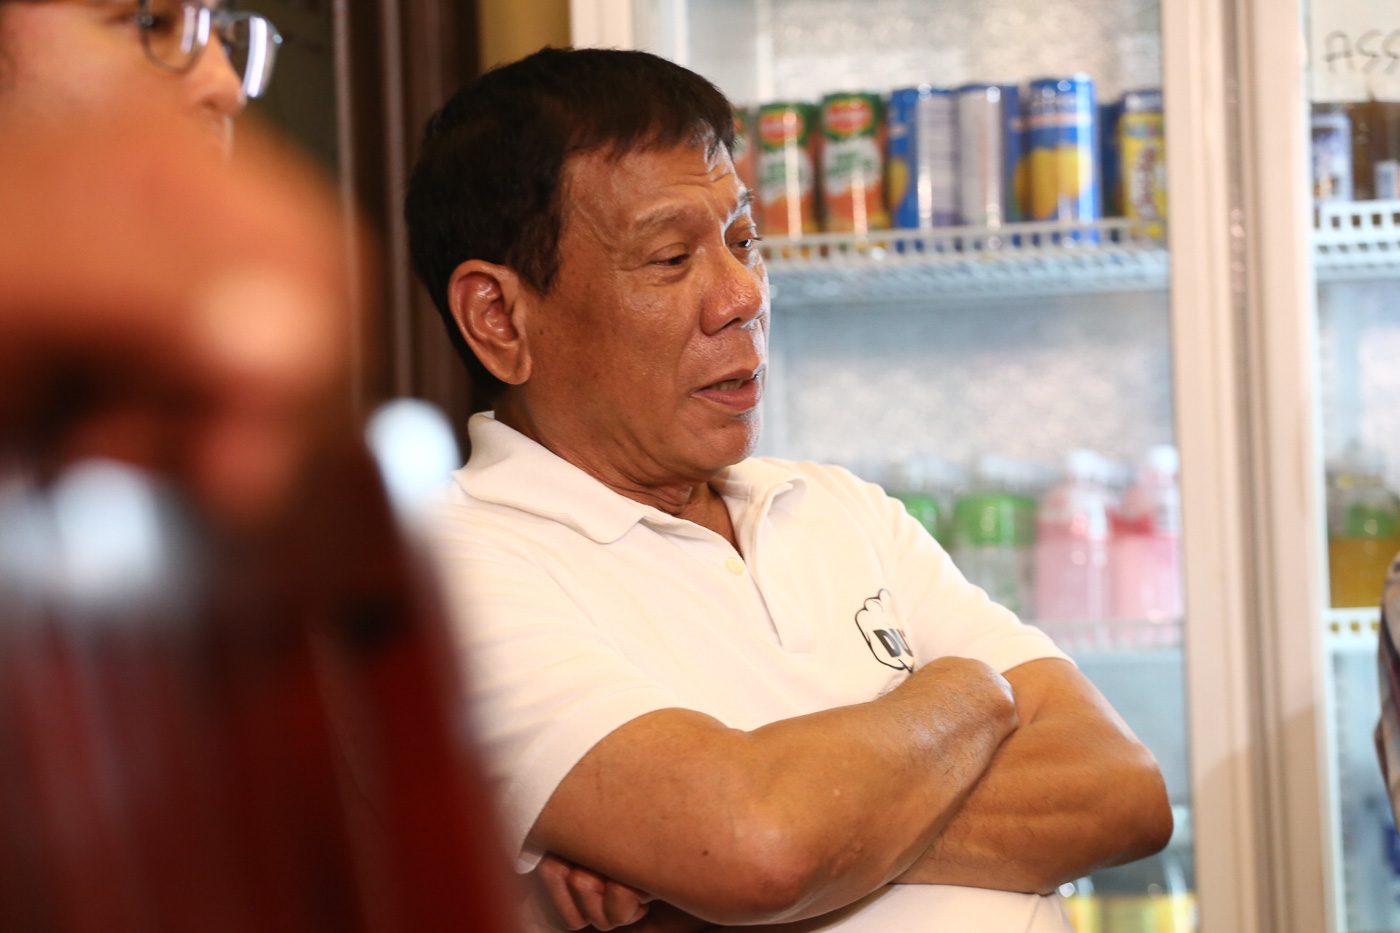 Duterte determined not to attend proclamation